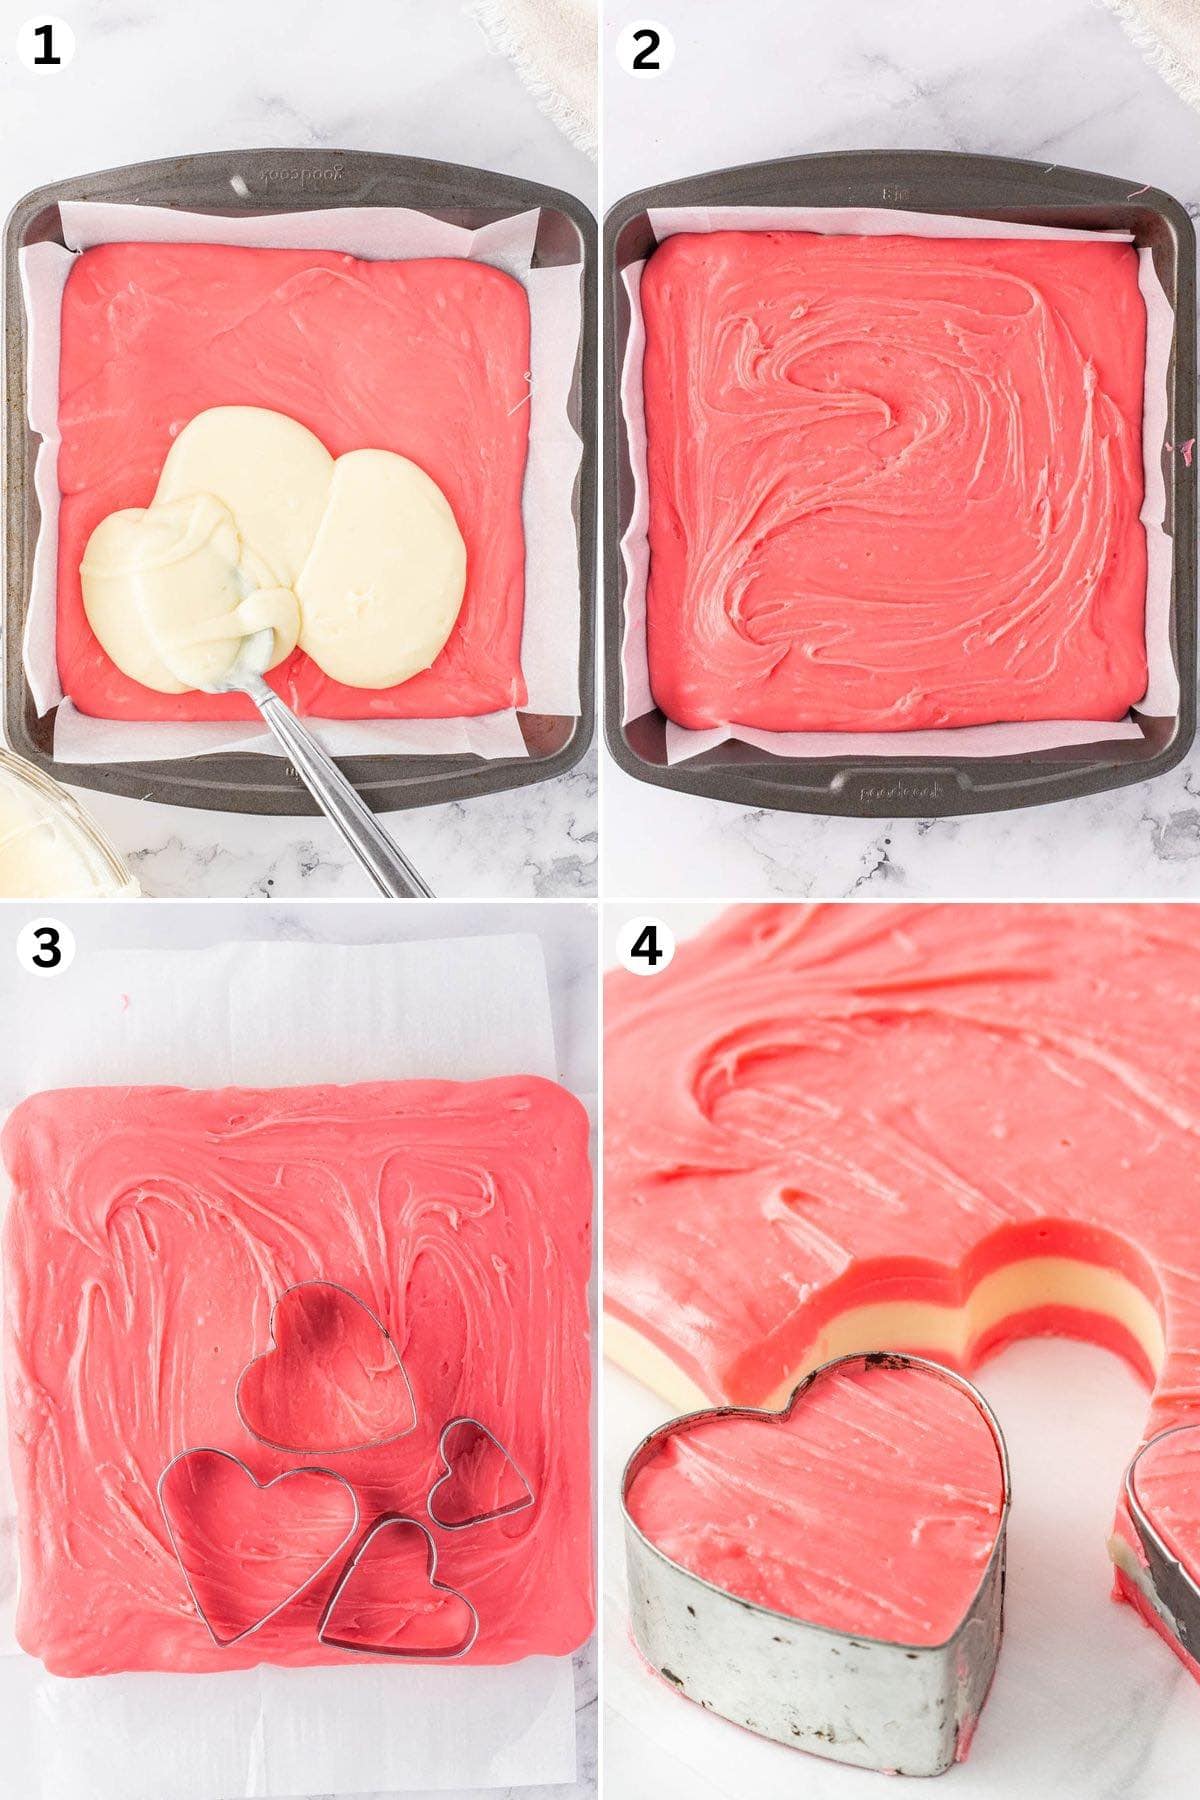 pour the pink layer in a pan and top with the white layer. Use a small heart-shaped cutter and cut a heart shaped fudge.